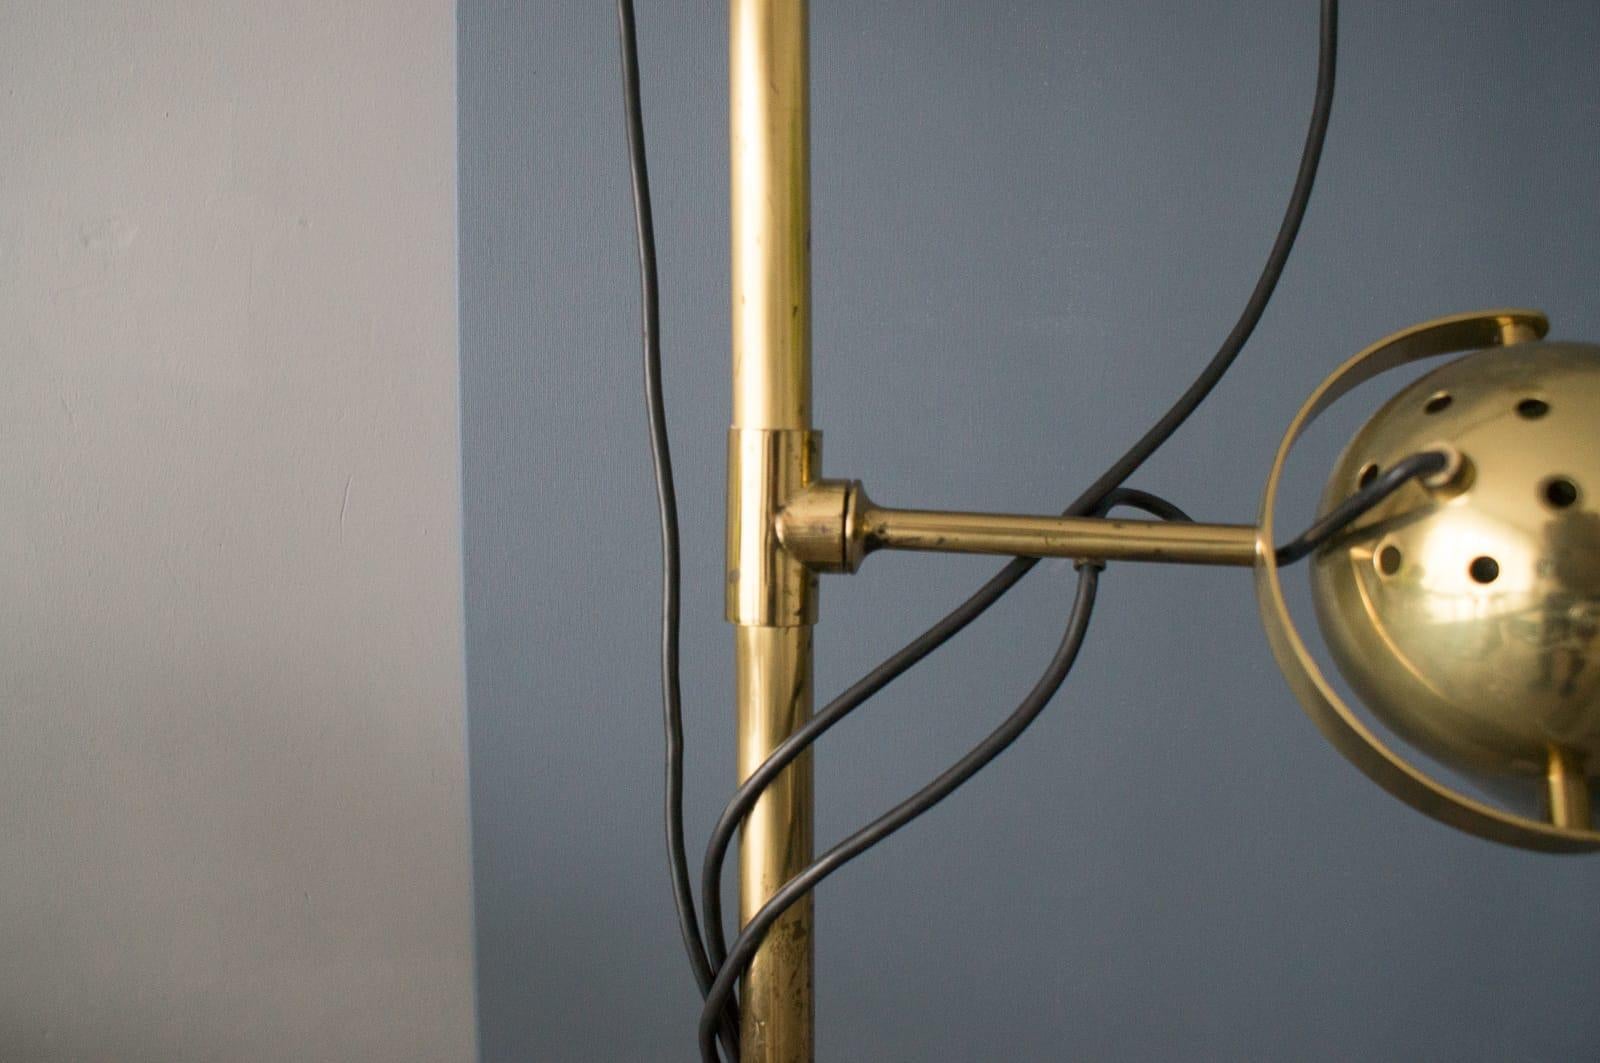 Extremly Rare Brass Tension Lamp from Florian Schulz, Model S 100 2